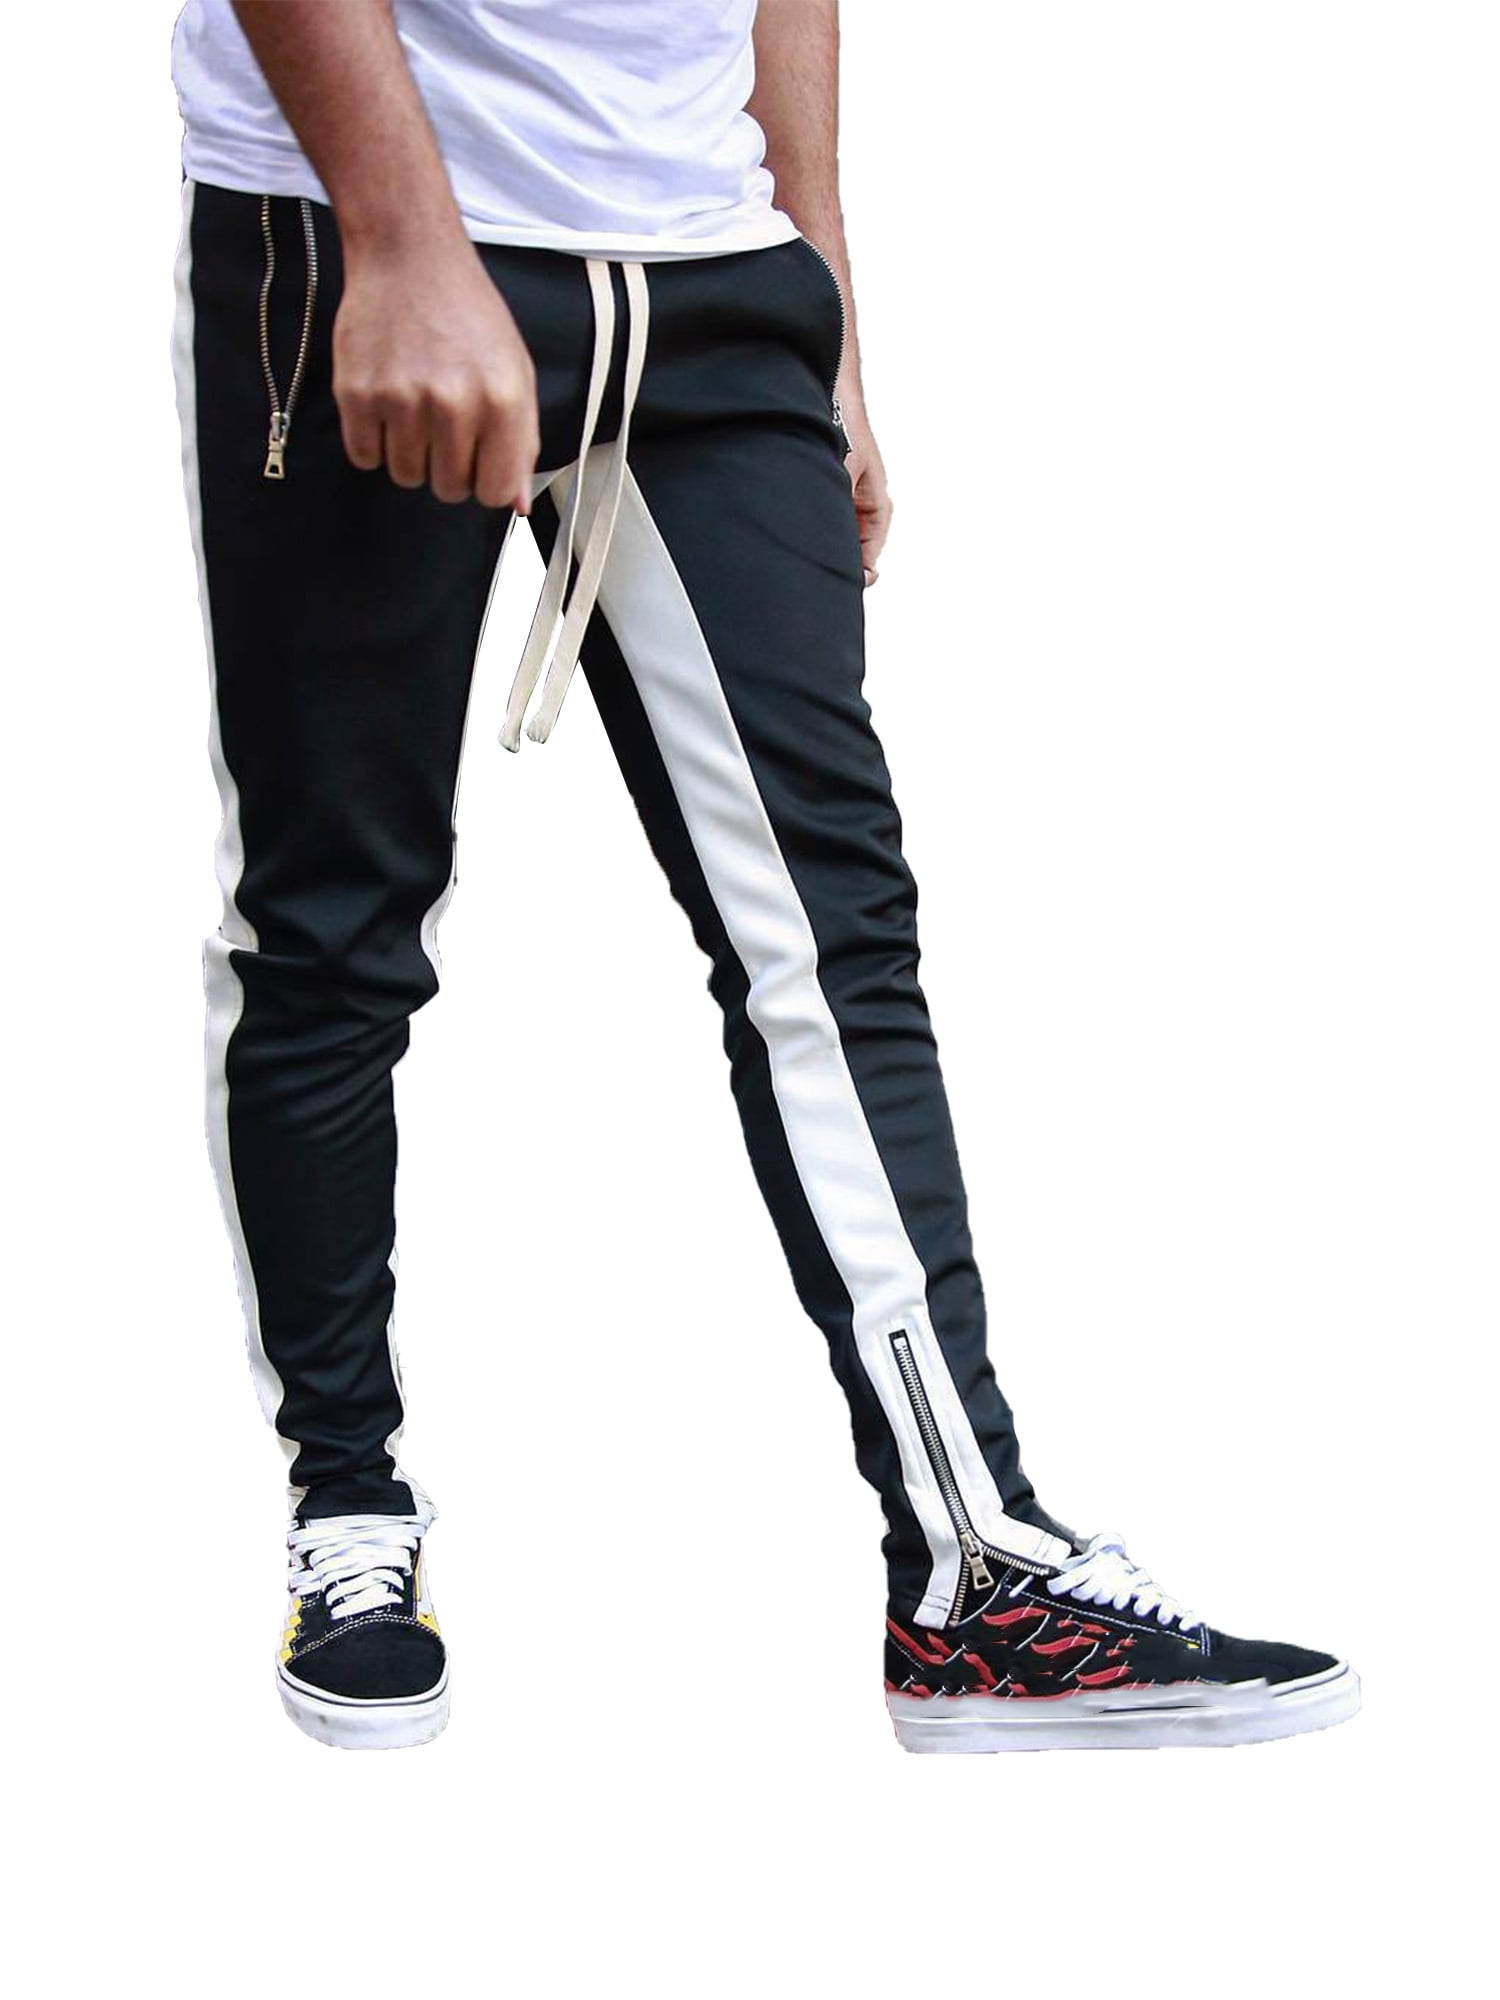 Private Bath Customiz Youth Kids Sweatpants New 100 Dollar Bill Boys Girls 3D Casual Active Sports Joggers Pants Trousers